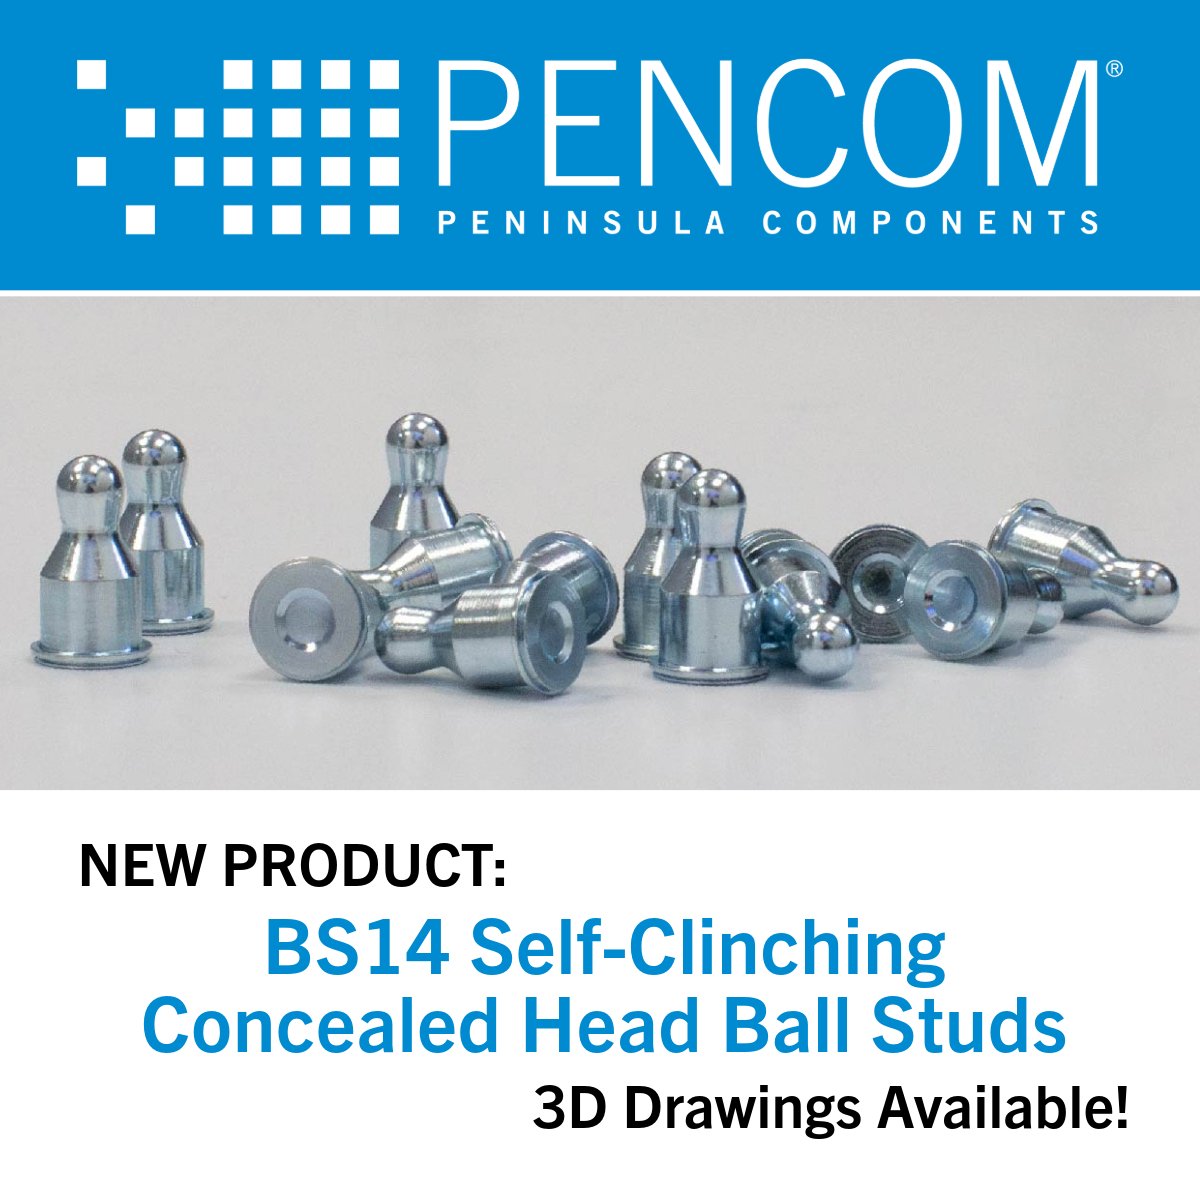 🔹New Product: BS14 Self-Clinching Concealed Head Ball Studs🔹 These ball studs ensure a robust seal and maintain a sleek, unblemished finish on the back sides of aluminum and steel sheets. 🔗3D drawings are available. Discover more: pencomsf.com/product-catalo… #PENCOM #ballstuds